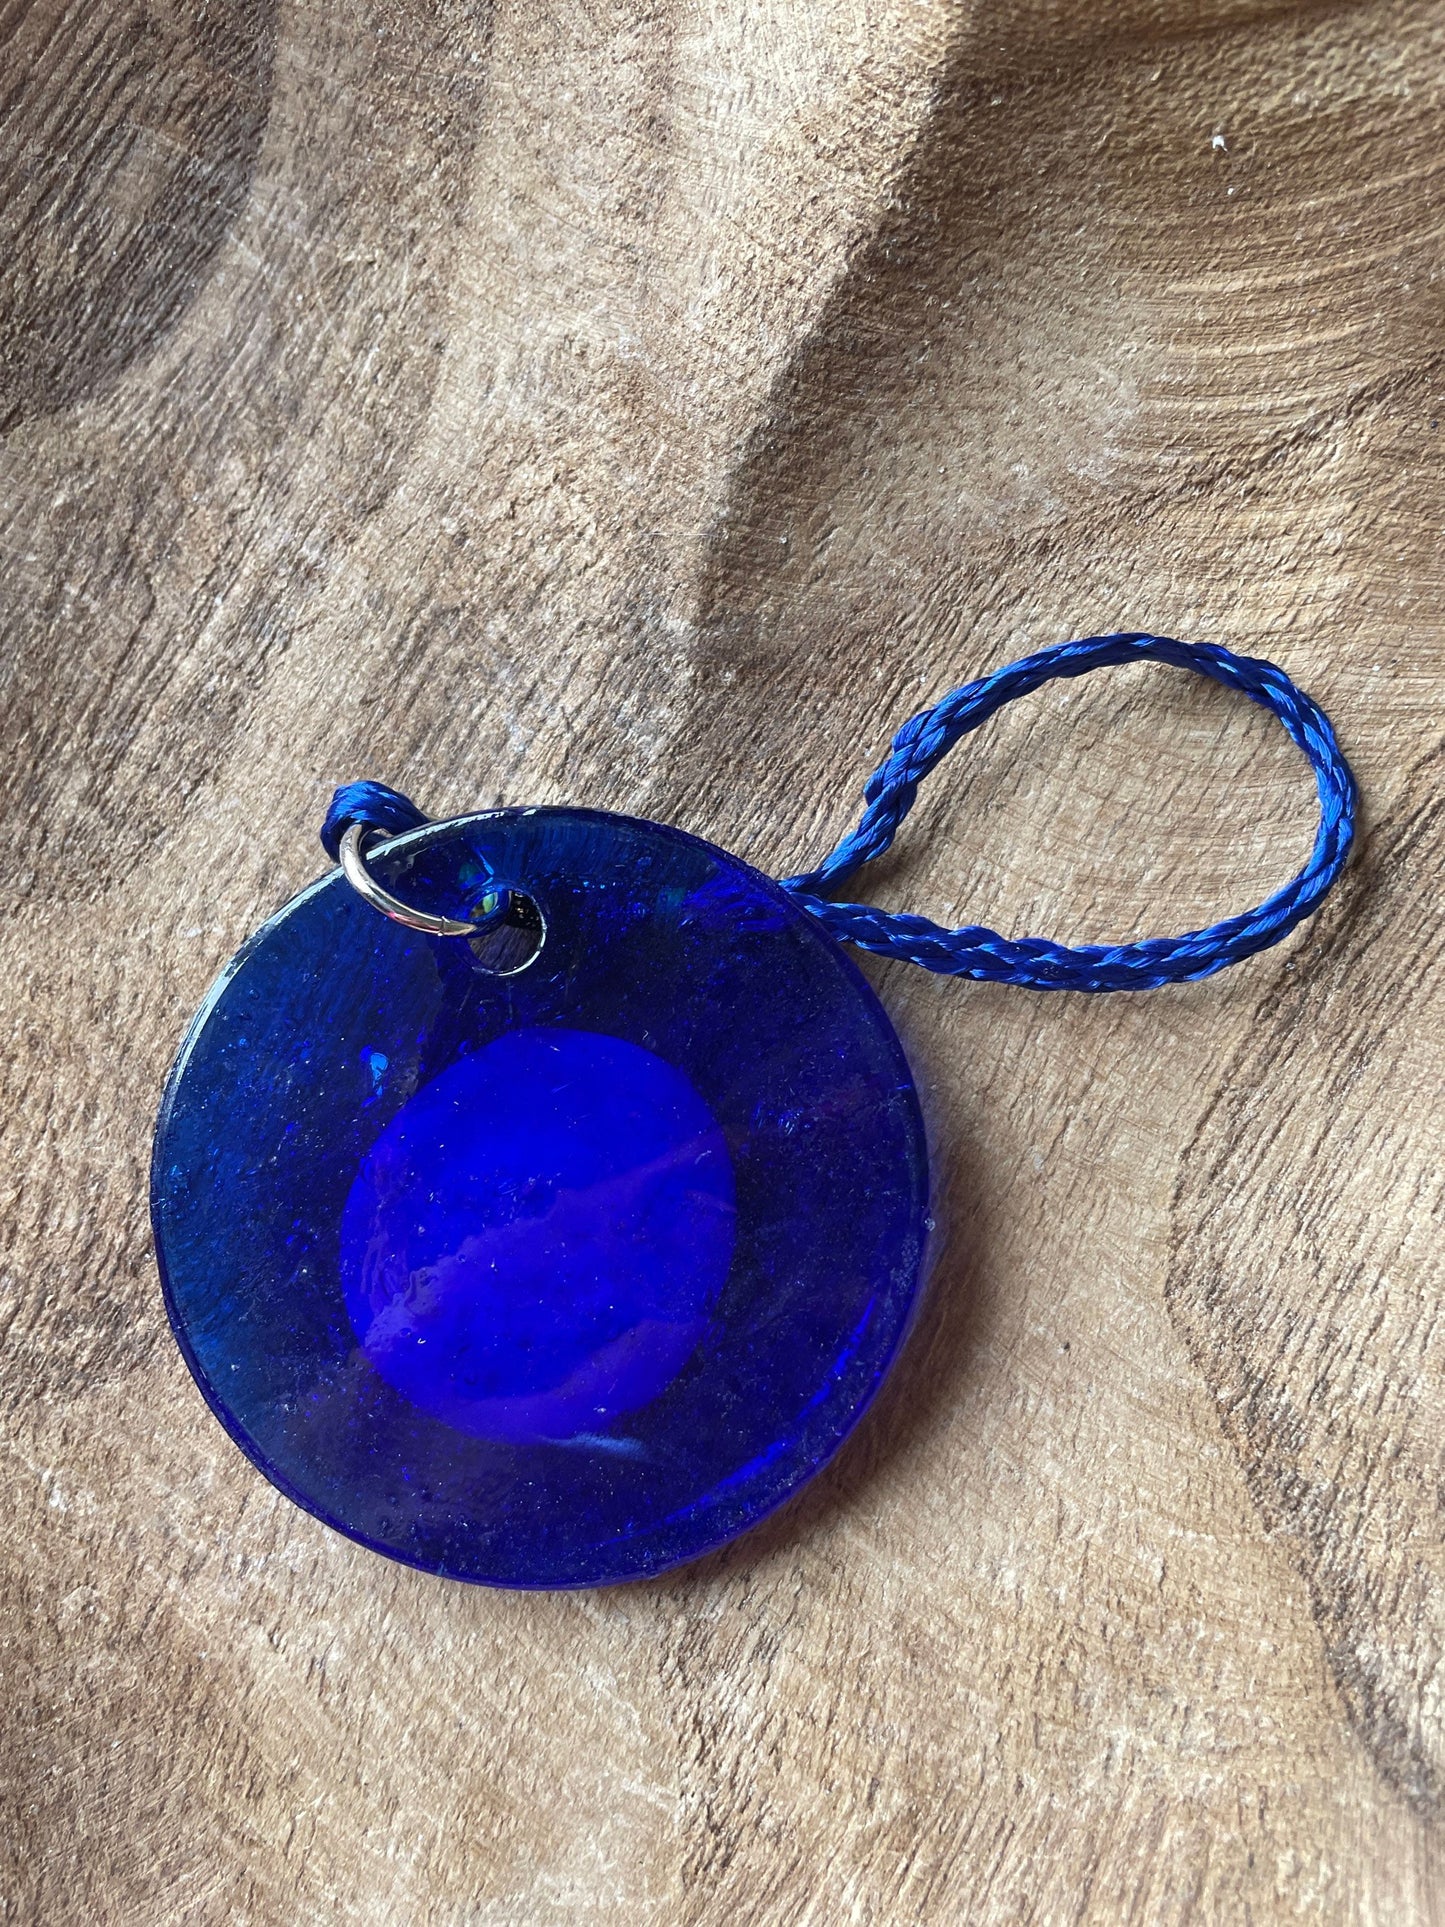 Glass Evil Eye Talisman 2.25 inches Round Blue Evil eye protection evil eye amulet protect against bad luck spells jealousy